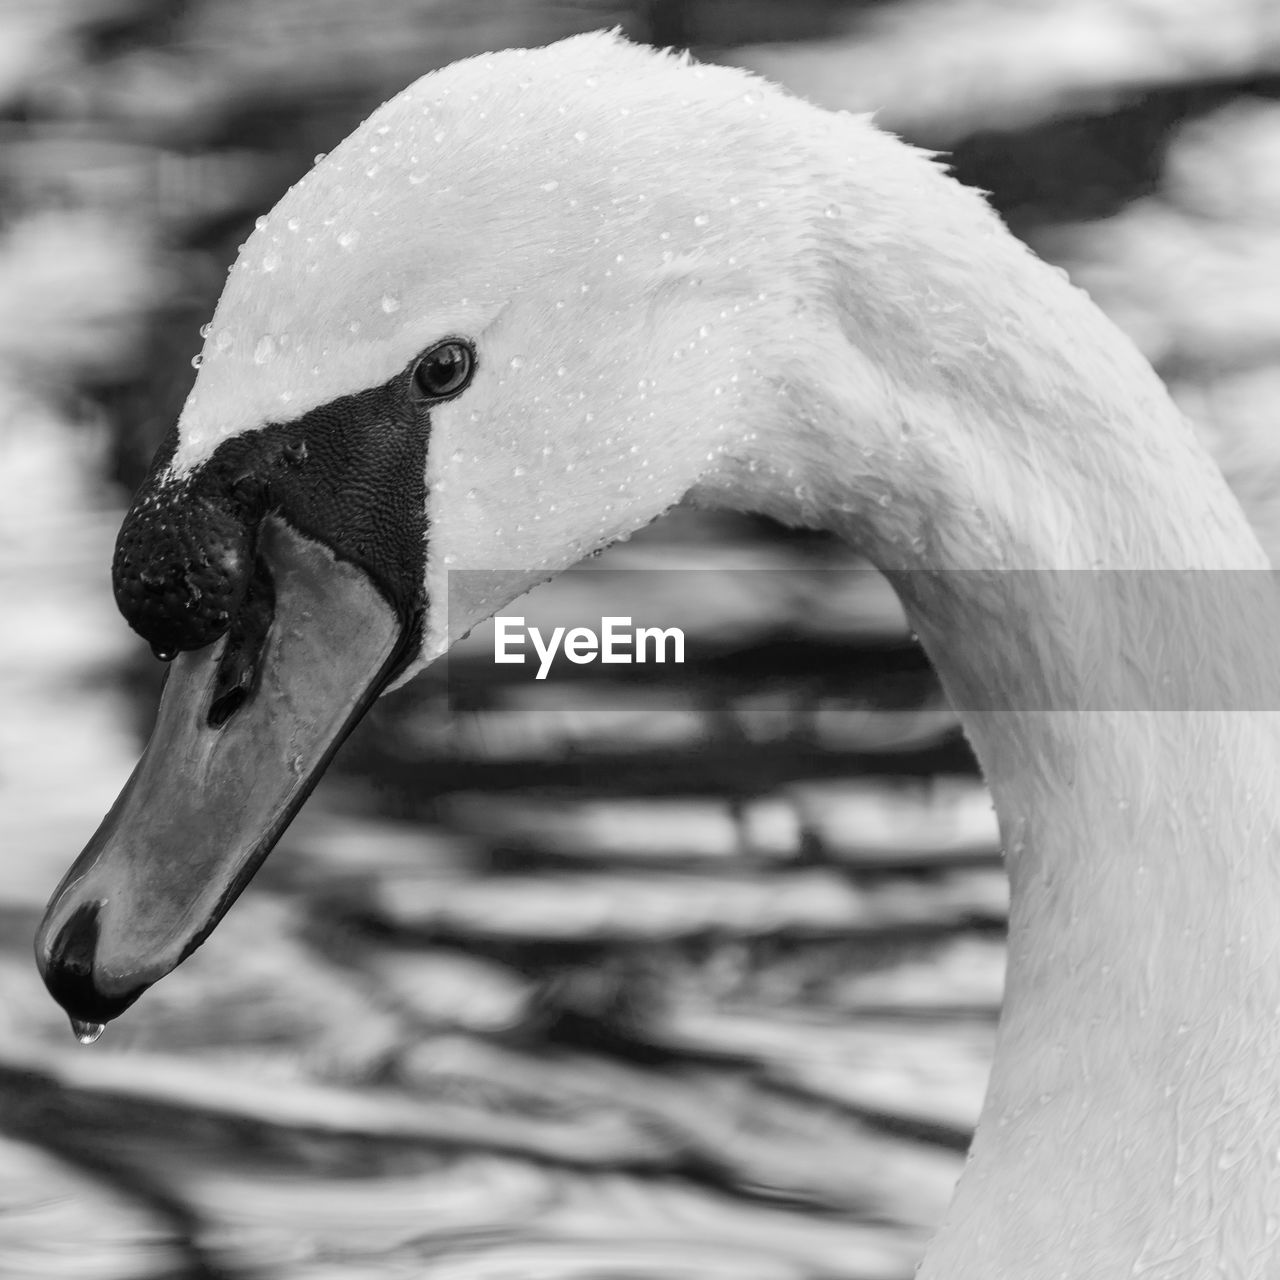 Close up of a swan